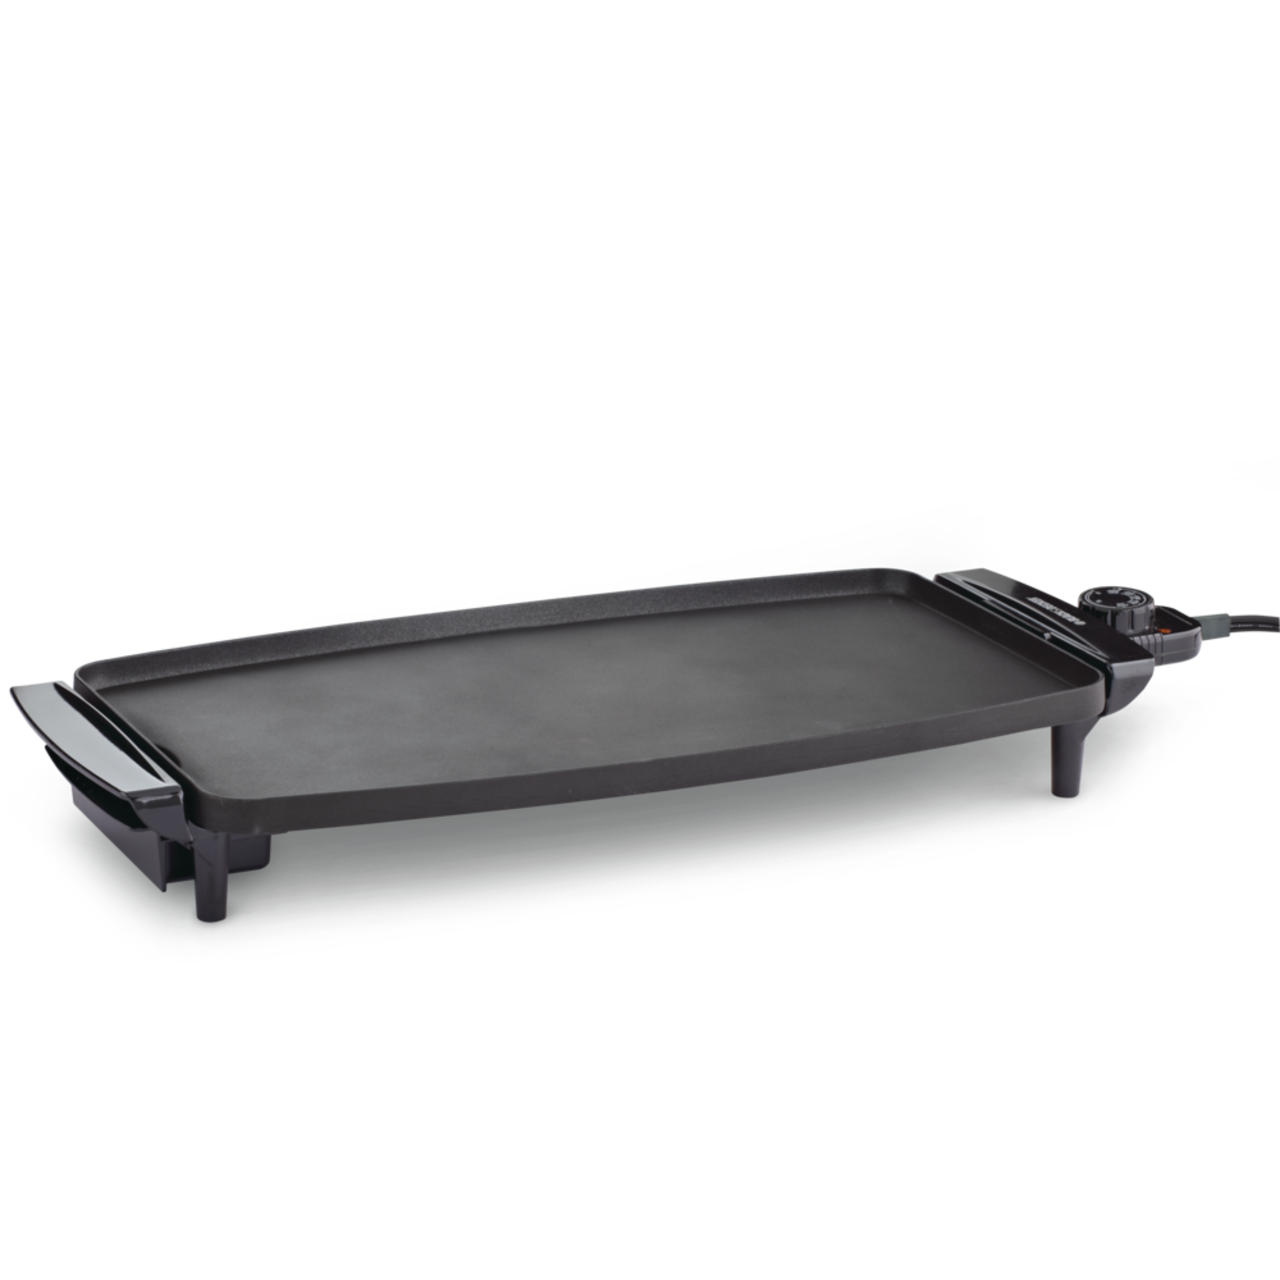 https://media-www.canadiantire.ca/product/living/kitchen/kitchen-appliances/0431156/black-decker-electric-griddle-10-in-x-18-in-25ef2a93-9eed-4680-88b9-a7337c63accf.png?imdensity=1&imwidth=1244&impolicy=mZoom